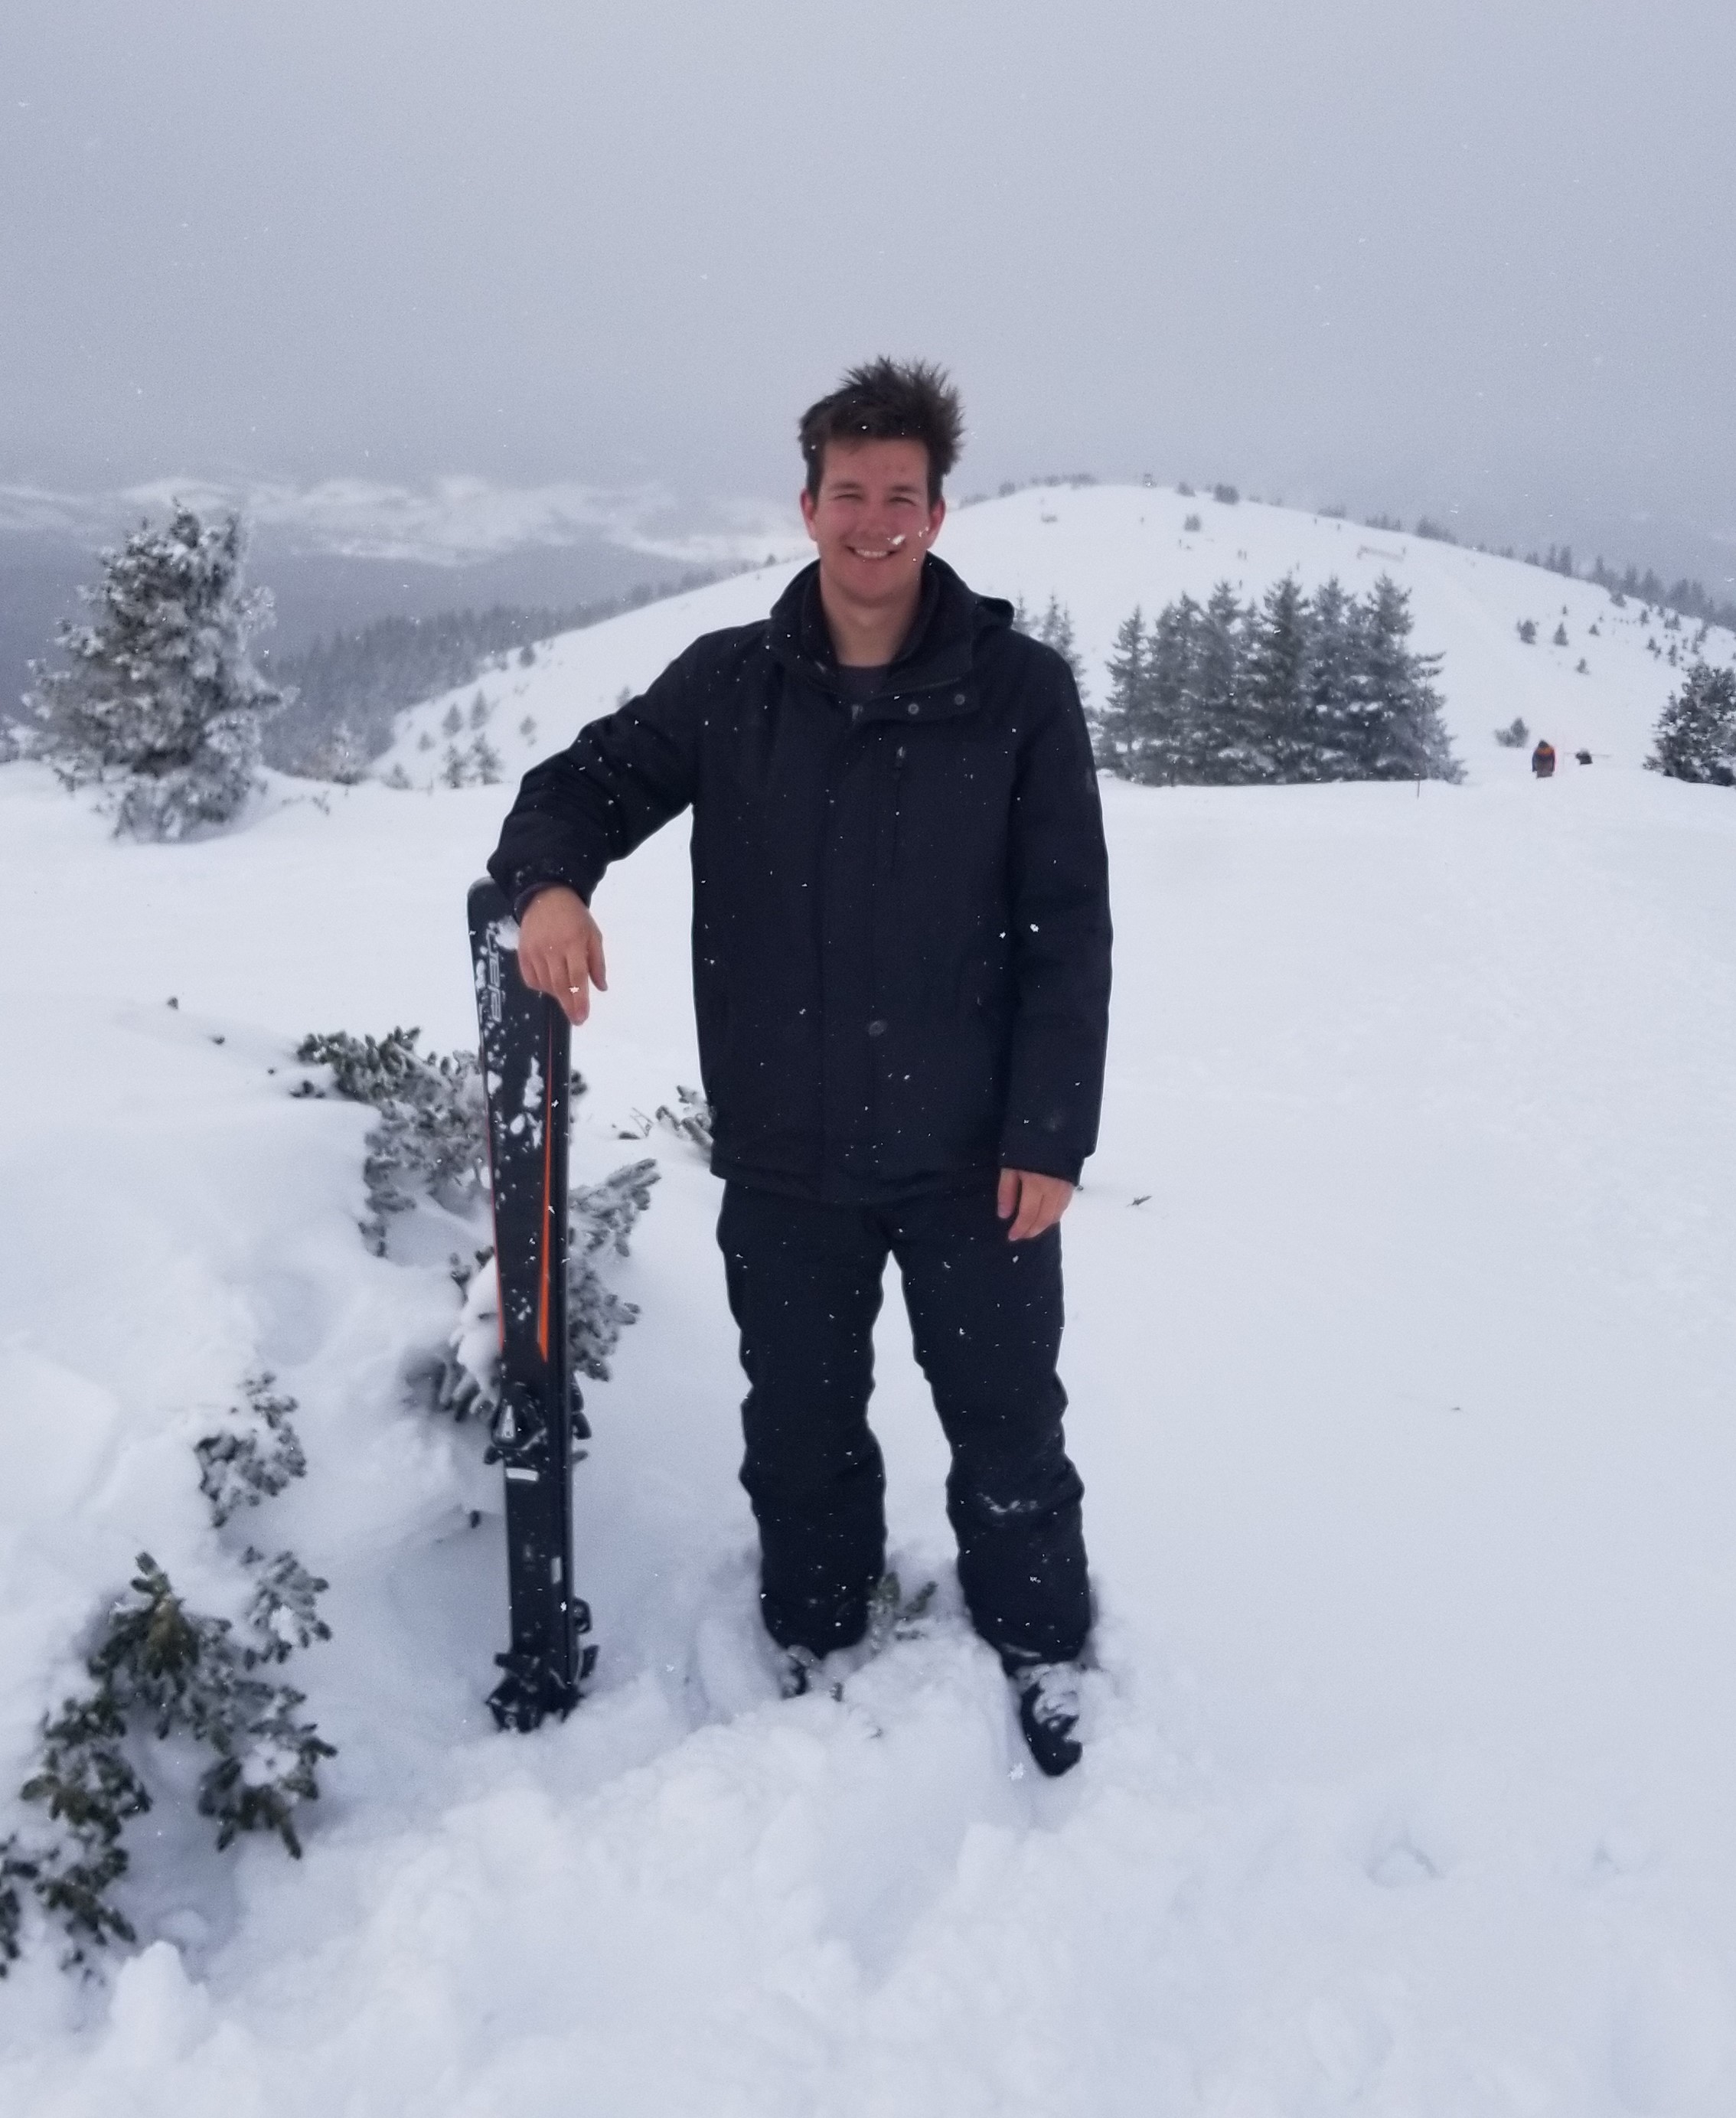 Elias poses next to his skis on a snowy hill in Colorado